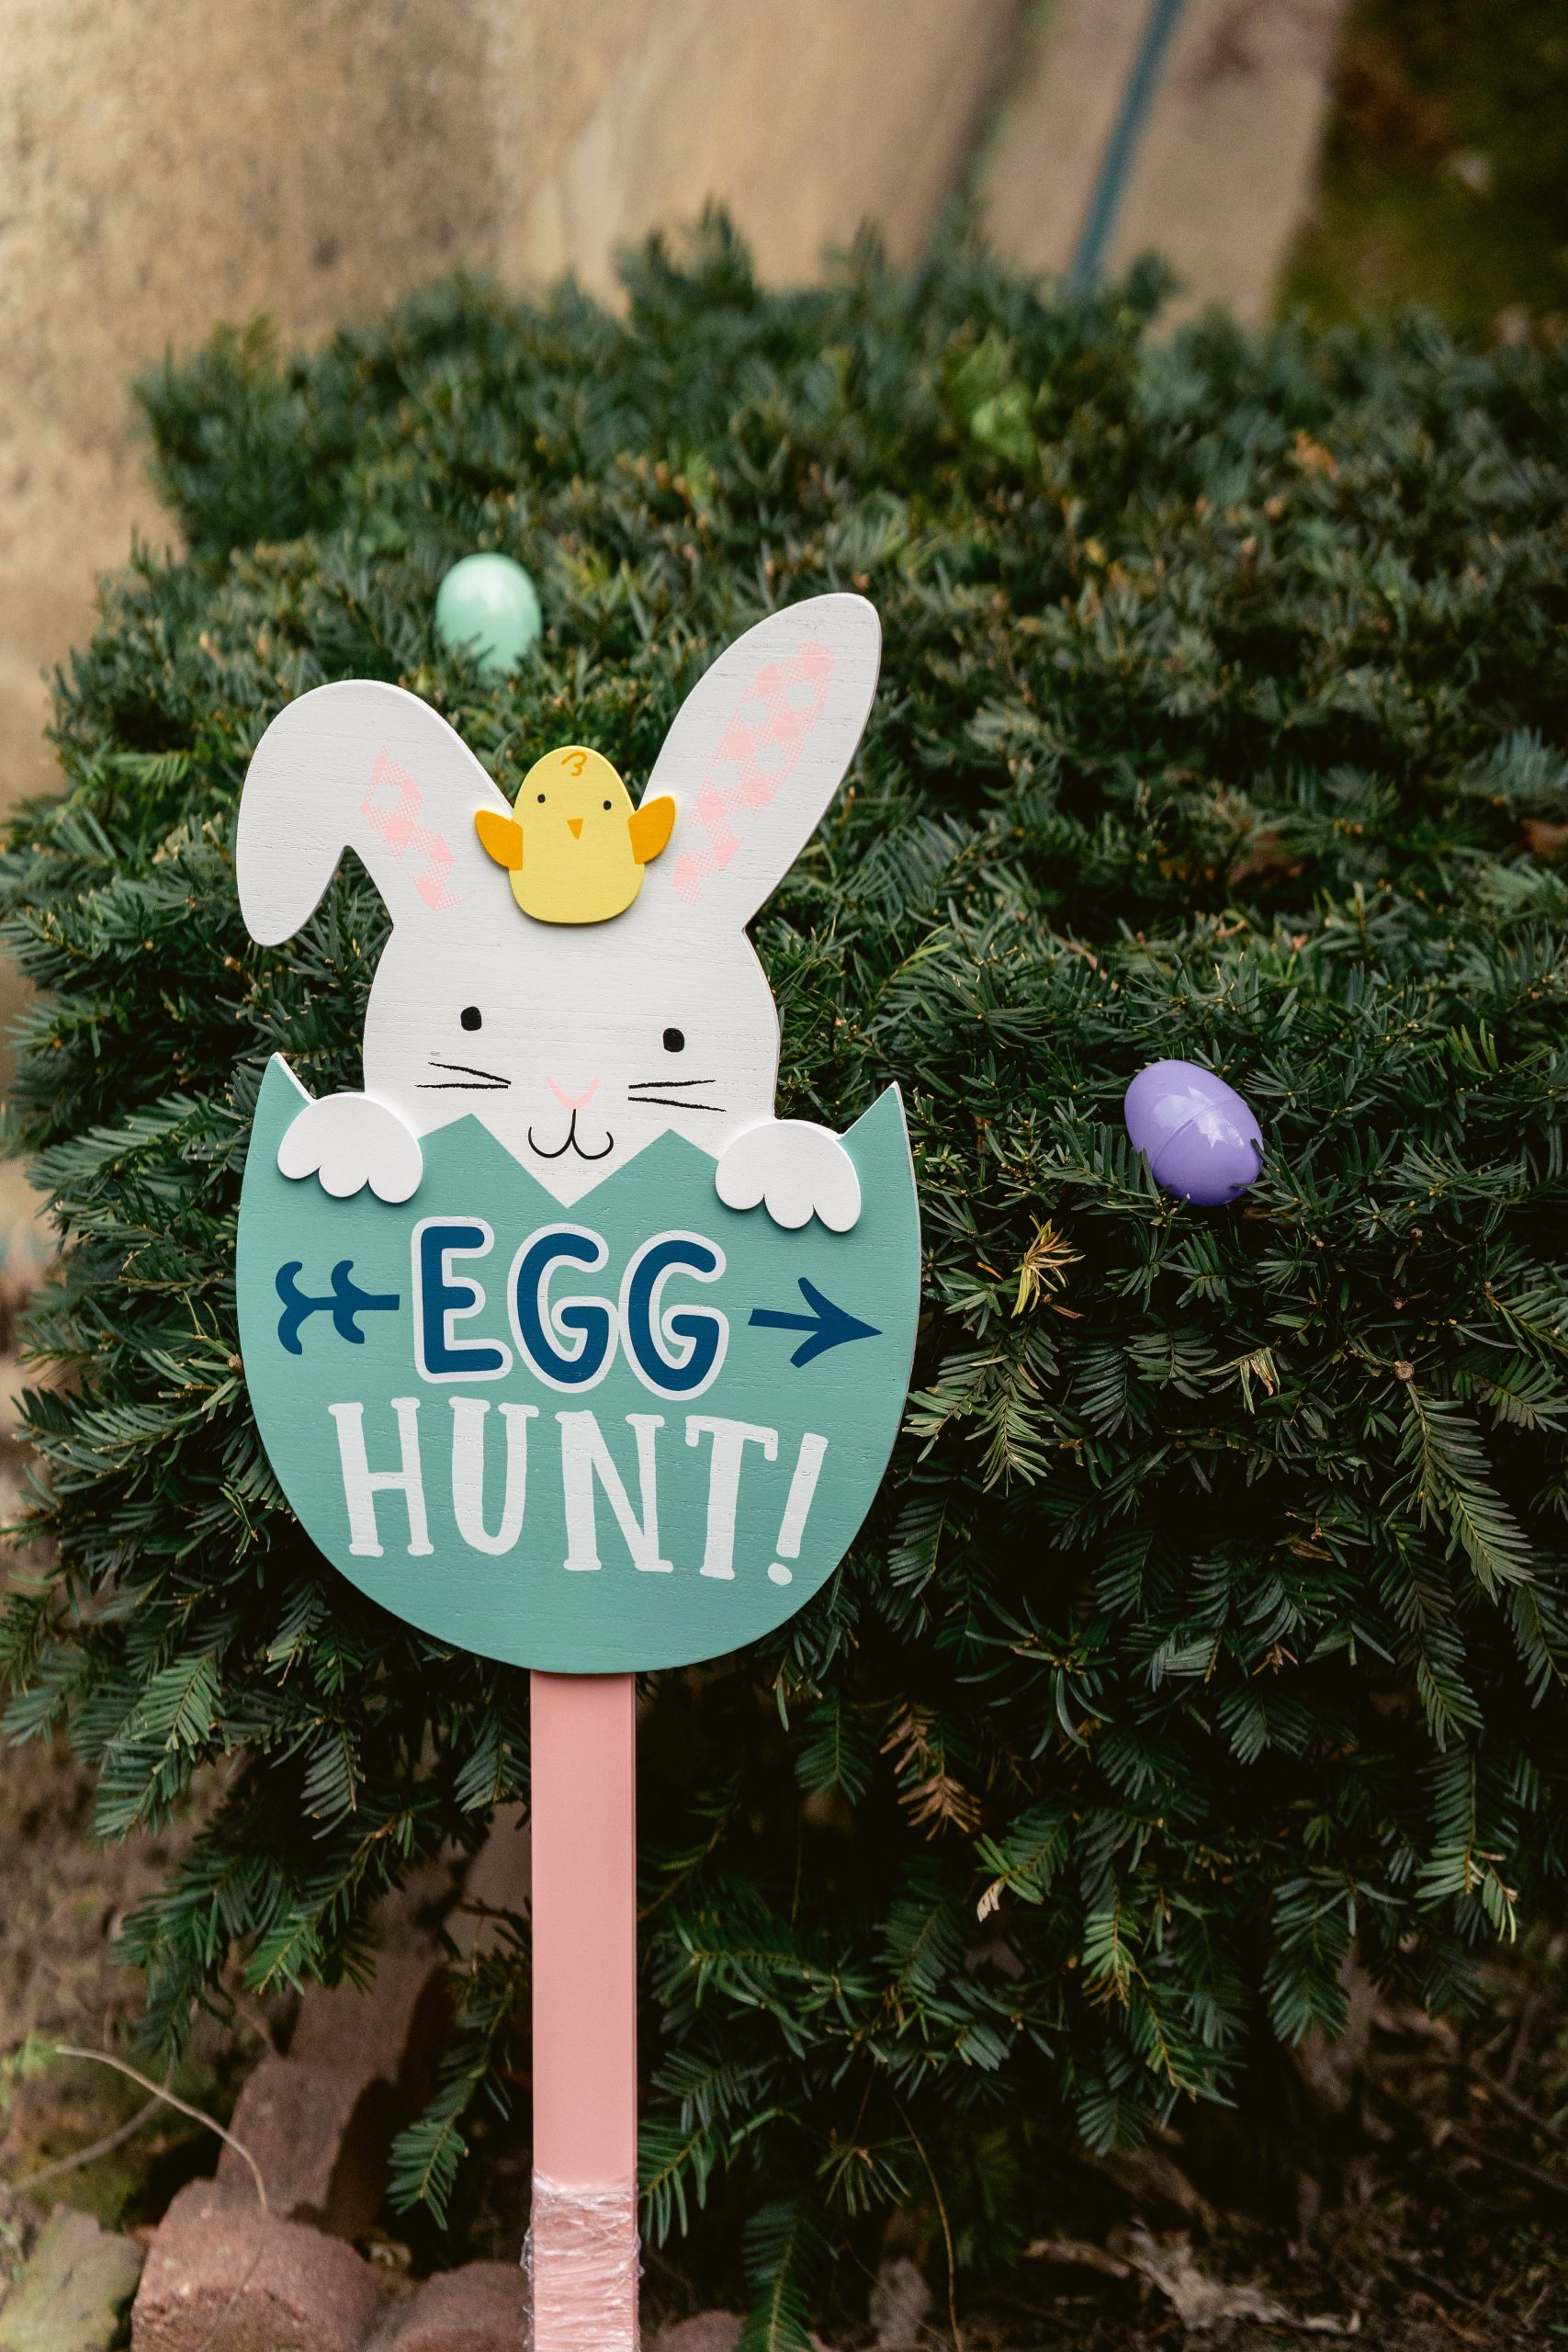 Family Friendly Events in Pocatello Idaho - Easter egg hunt, petting zoo, monster truck